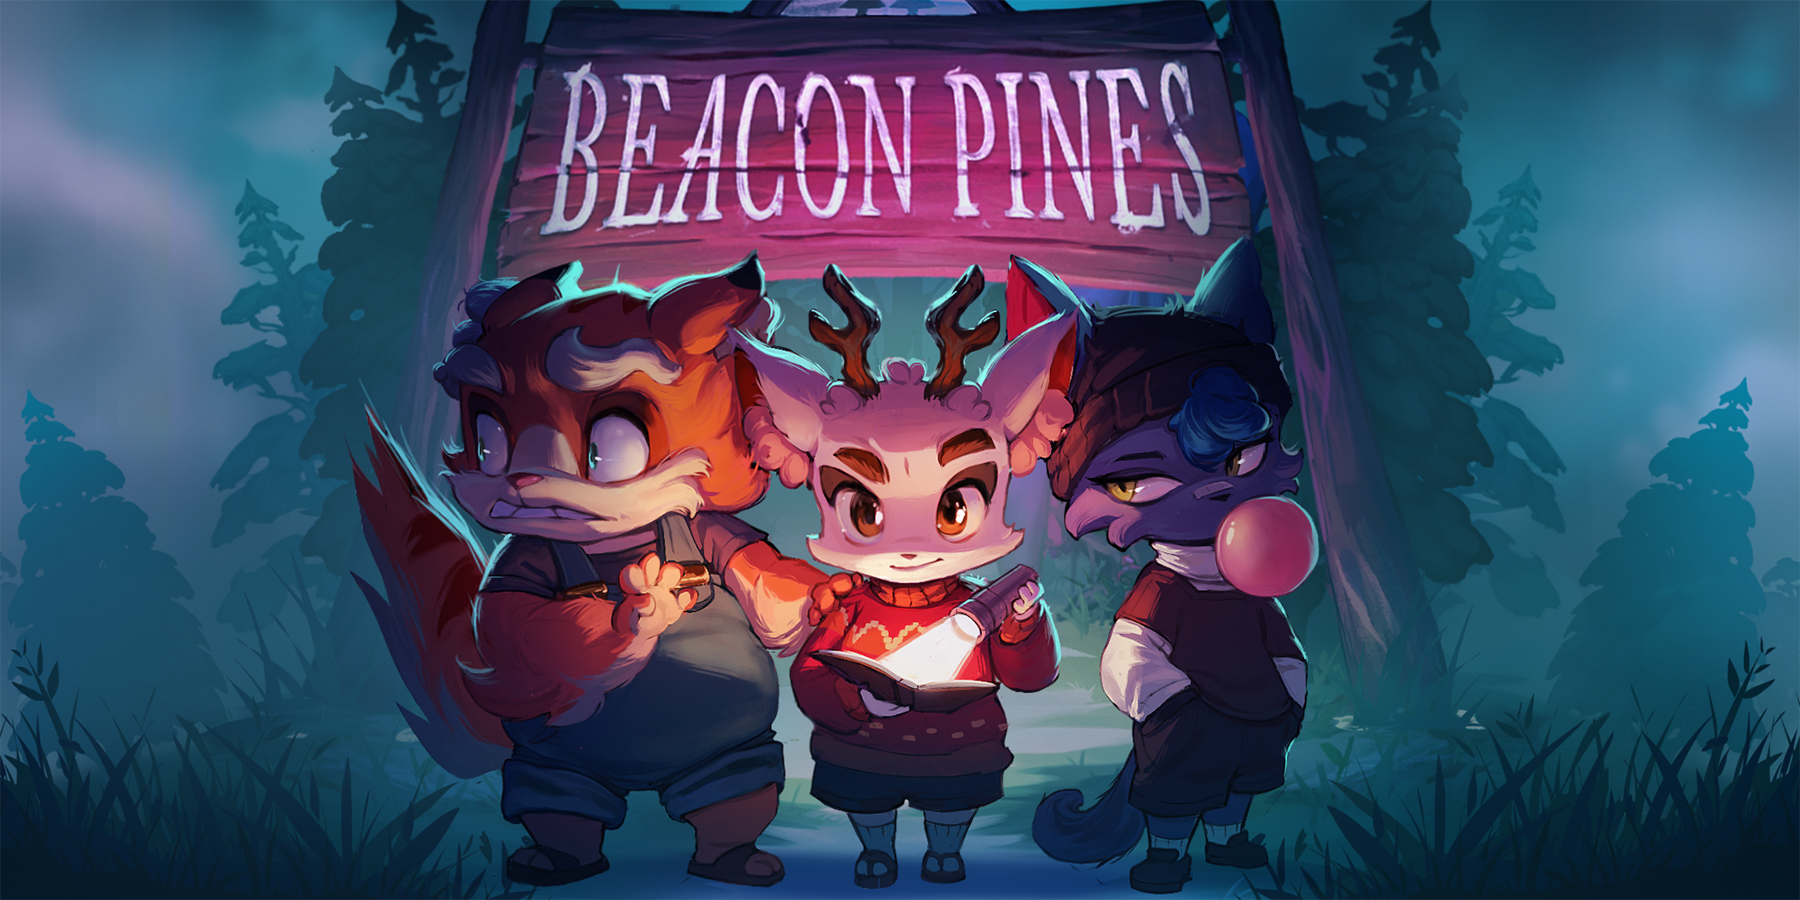 beacon pines review luka rolo beck